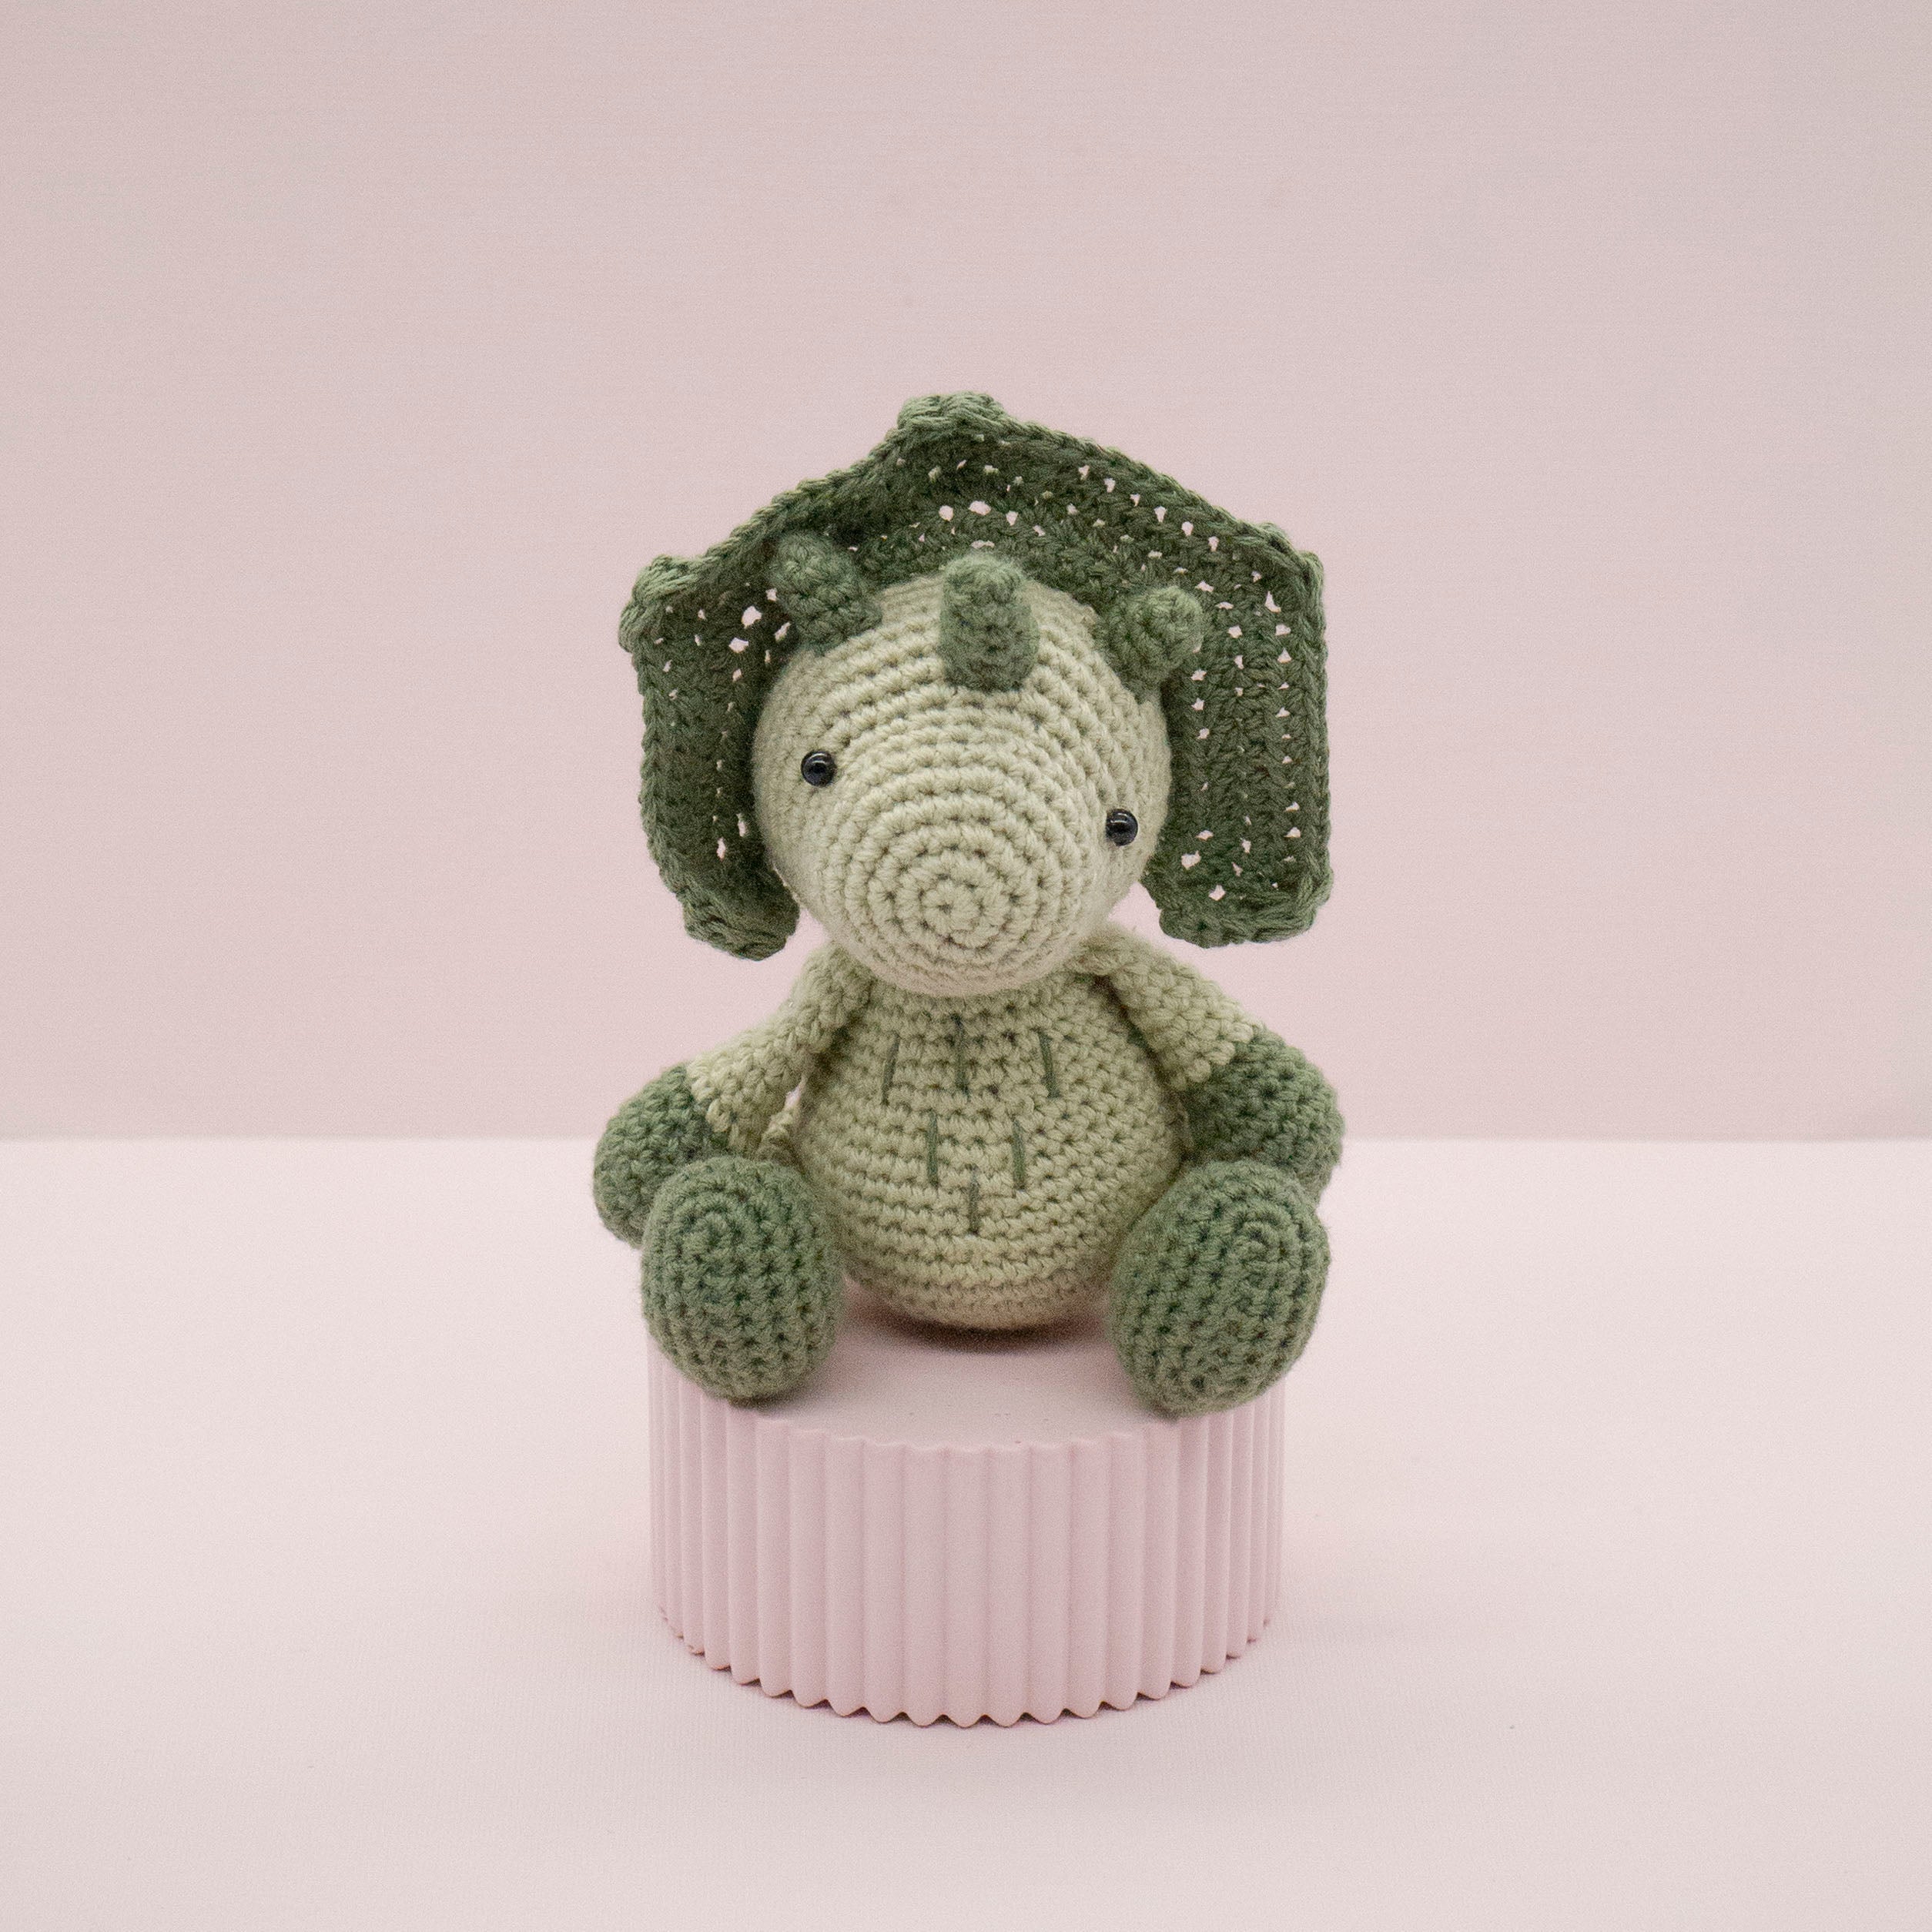 Crochet Your Own Triceratops: Green Sitting